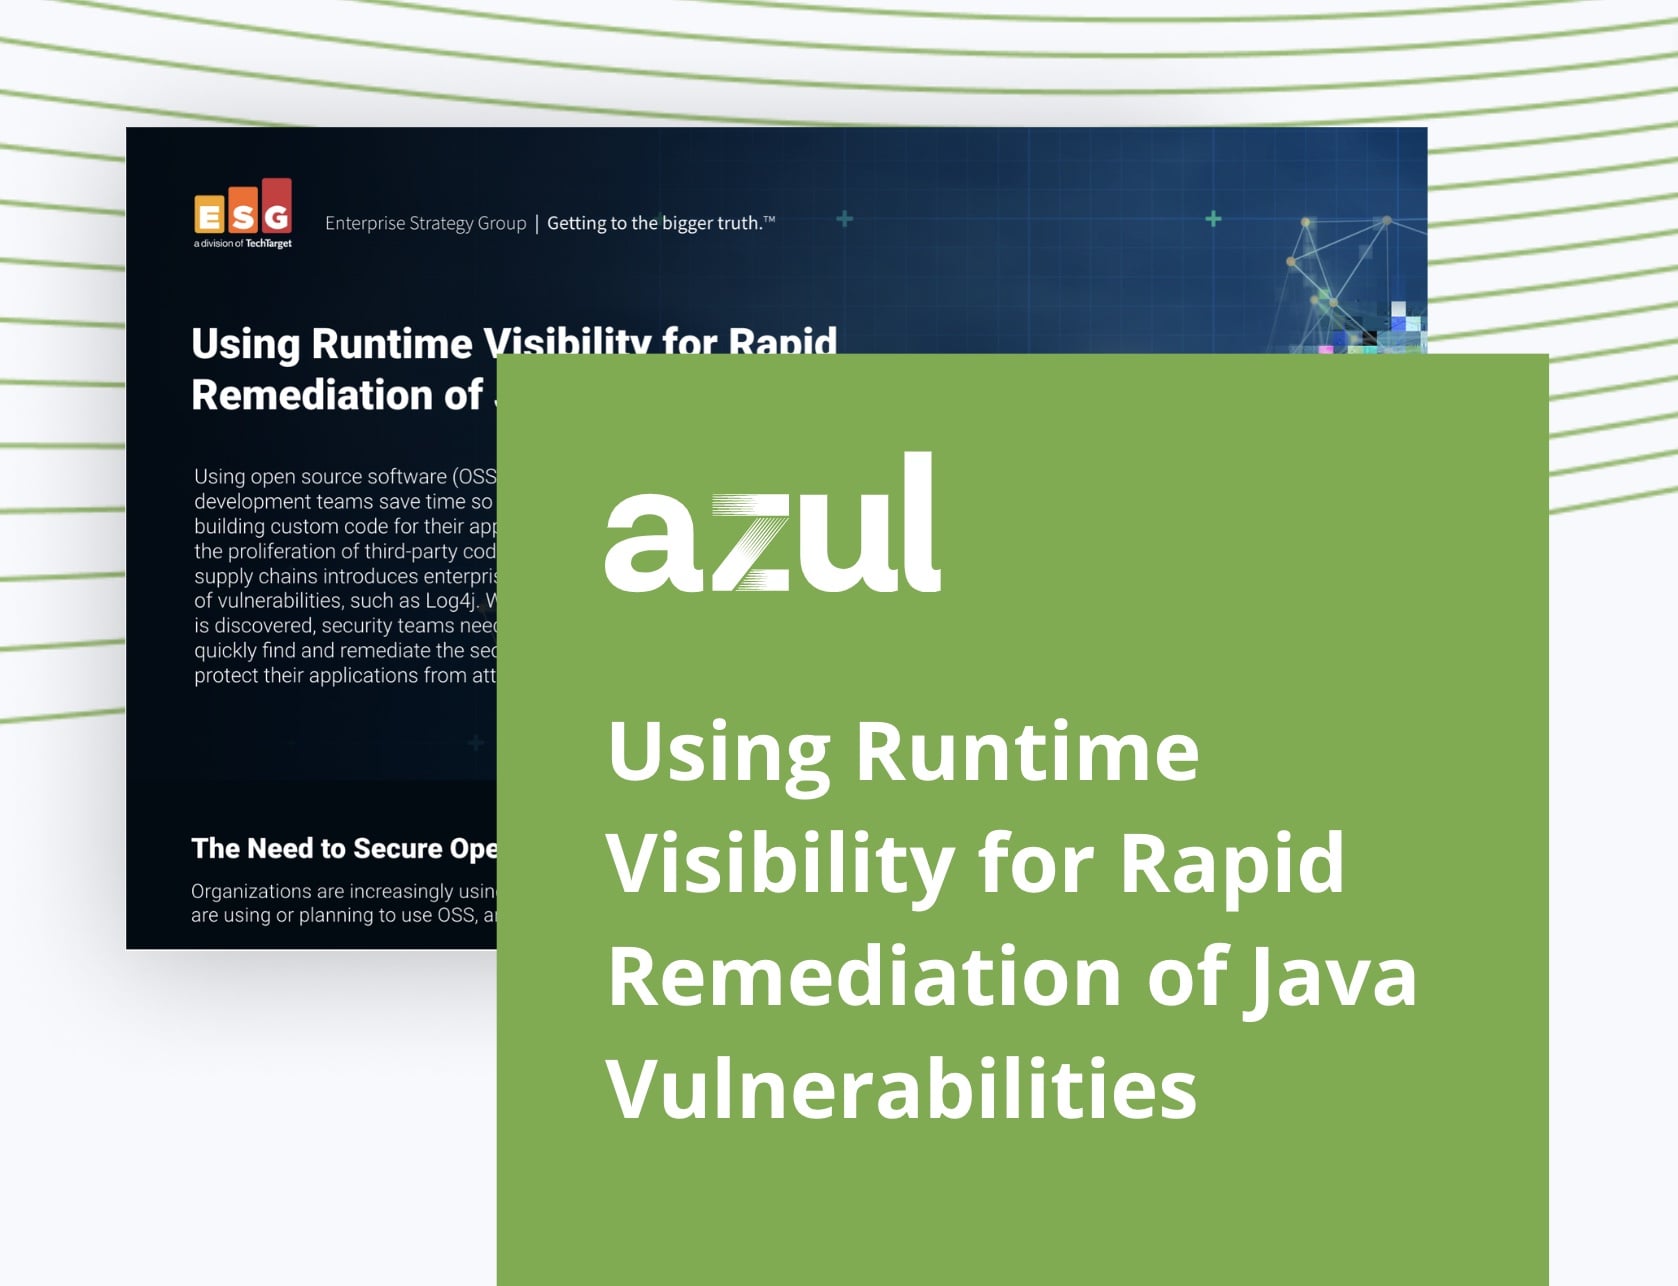 Using Runtime Visibility for Rapid Remediation of Java Vulnerabilities